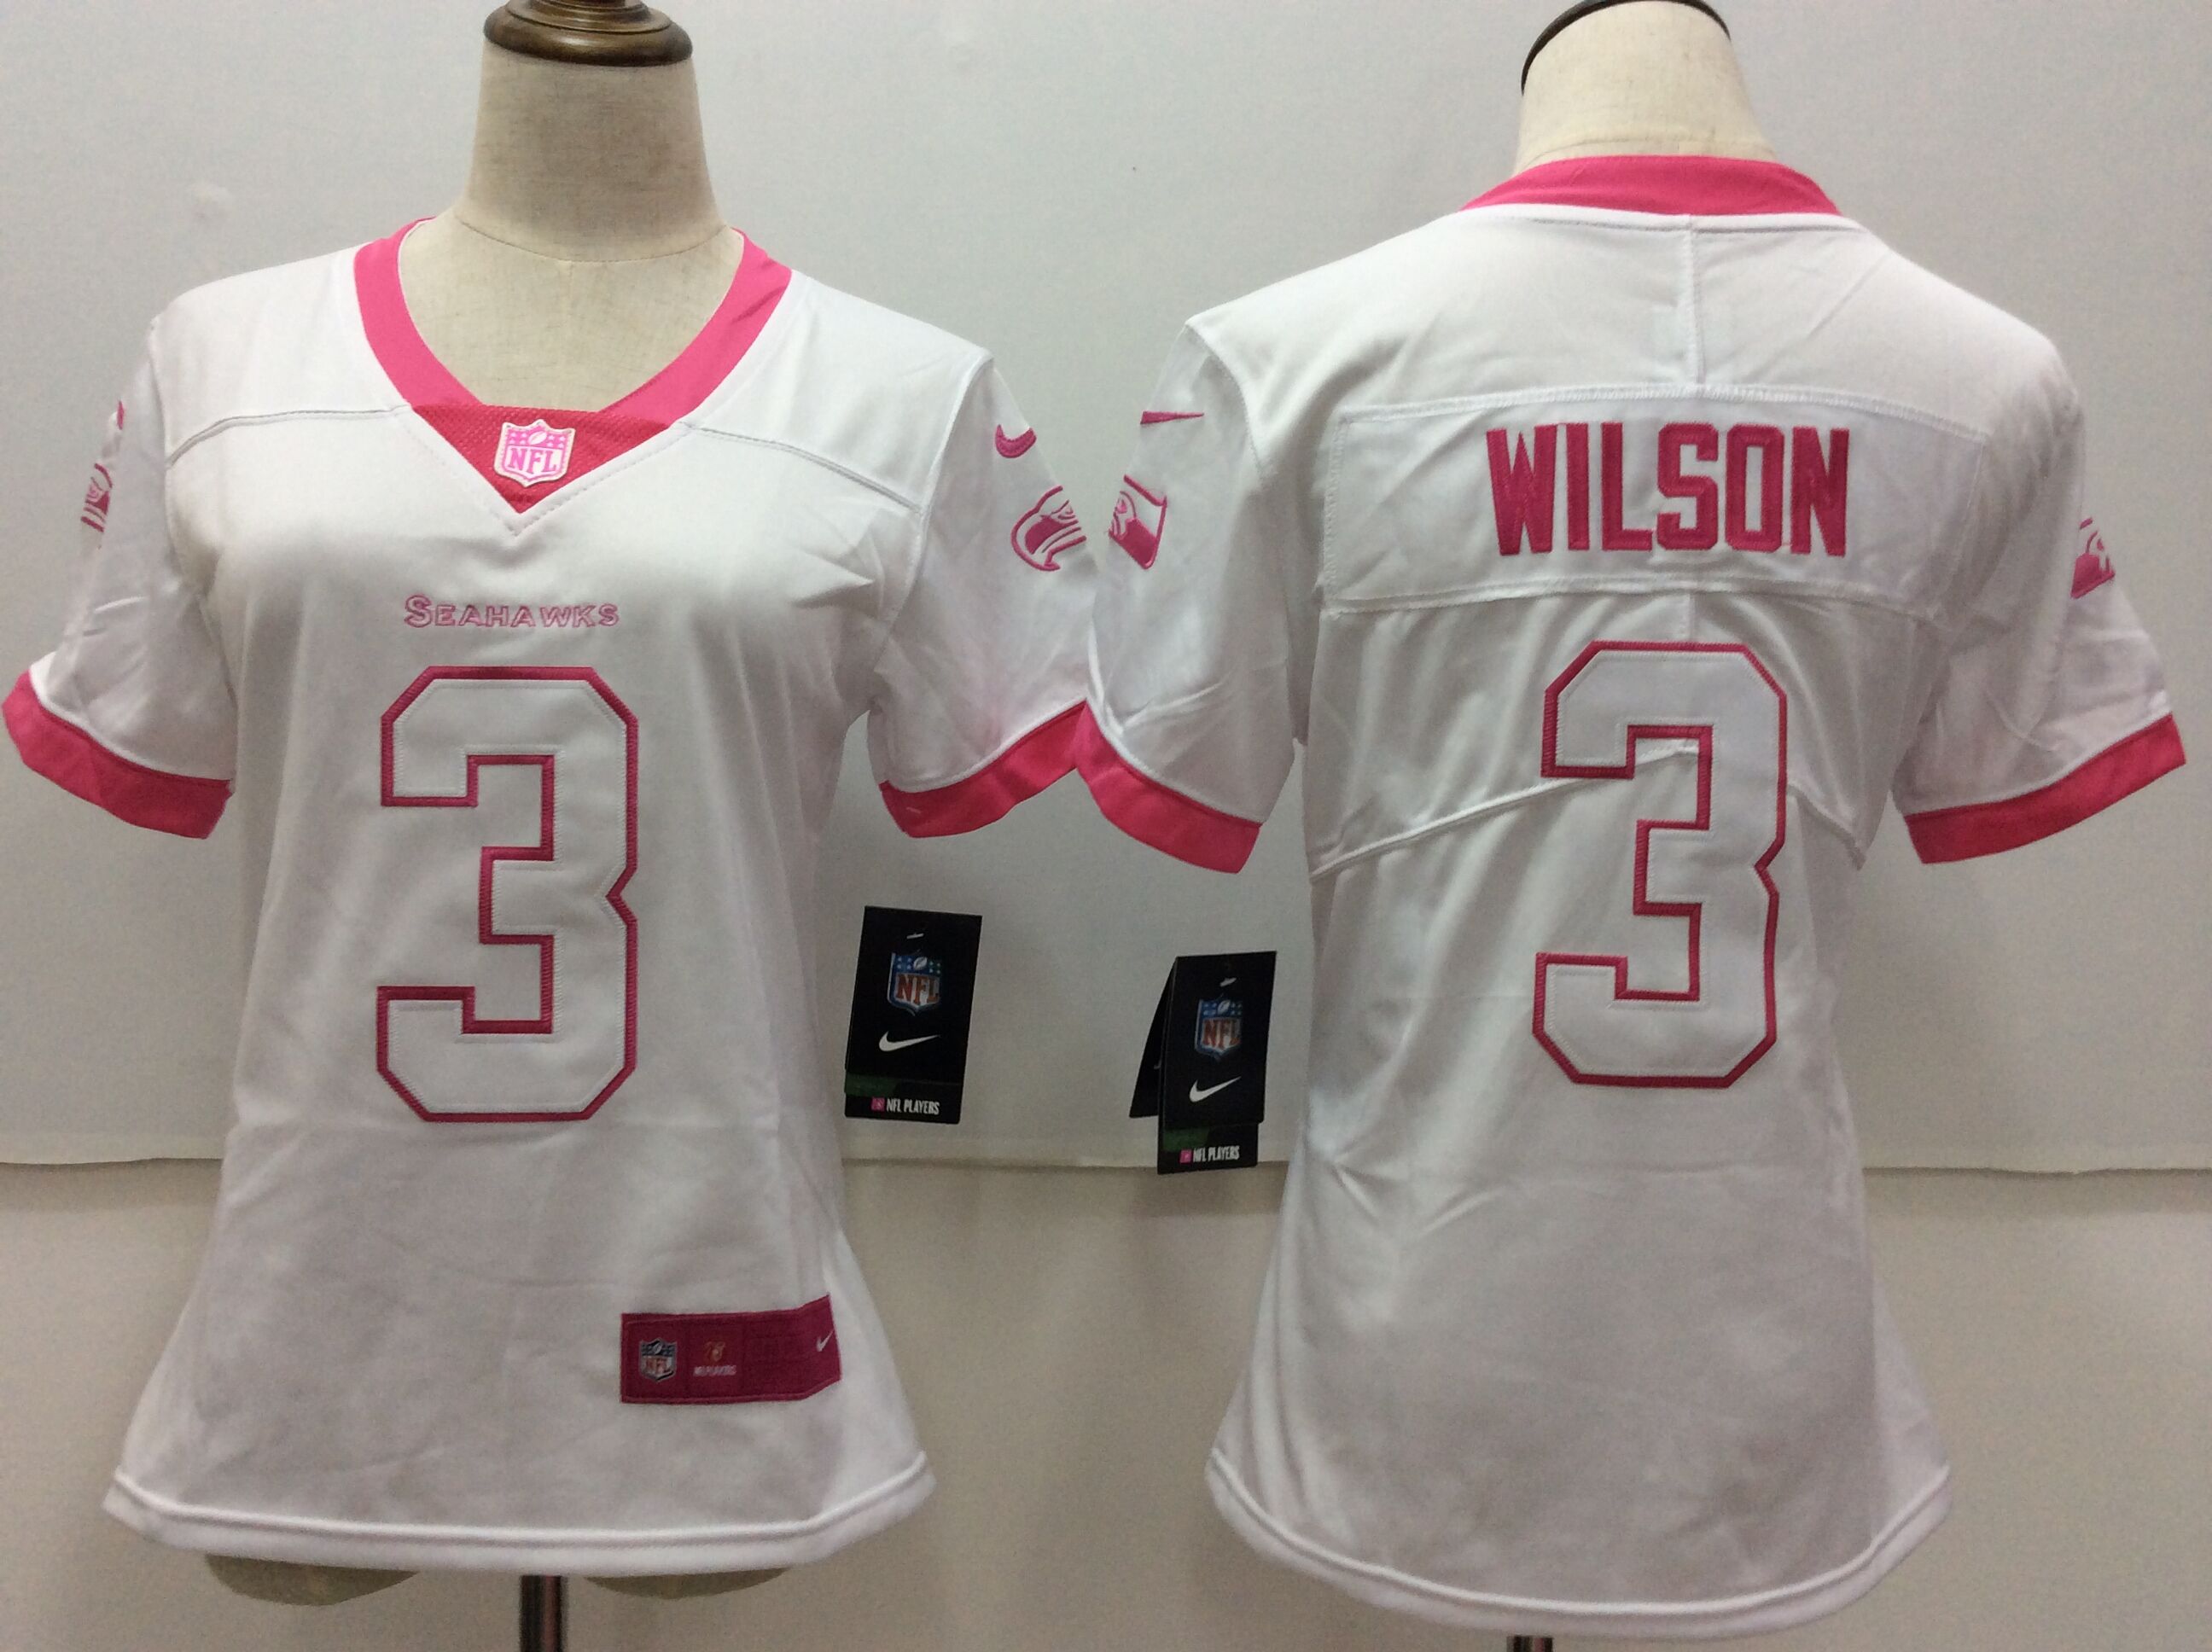 Nike Seahawks 3 Russell Wilson White Pink Women Color Rush Limited Jersey